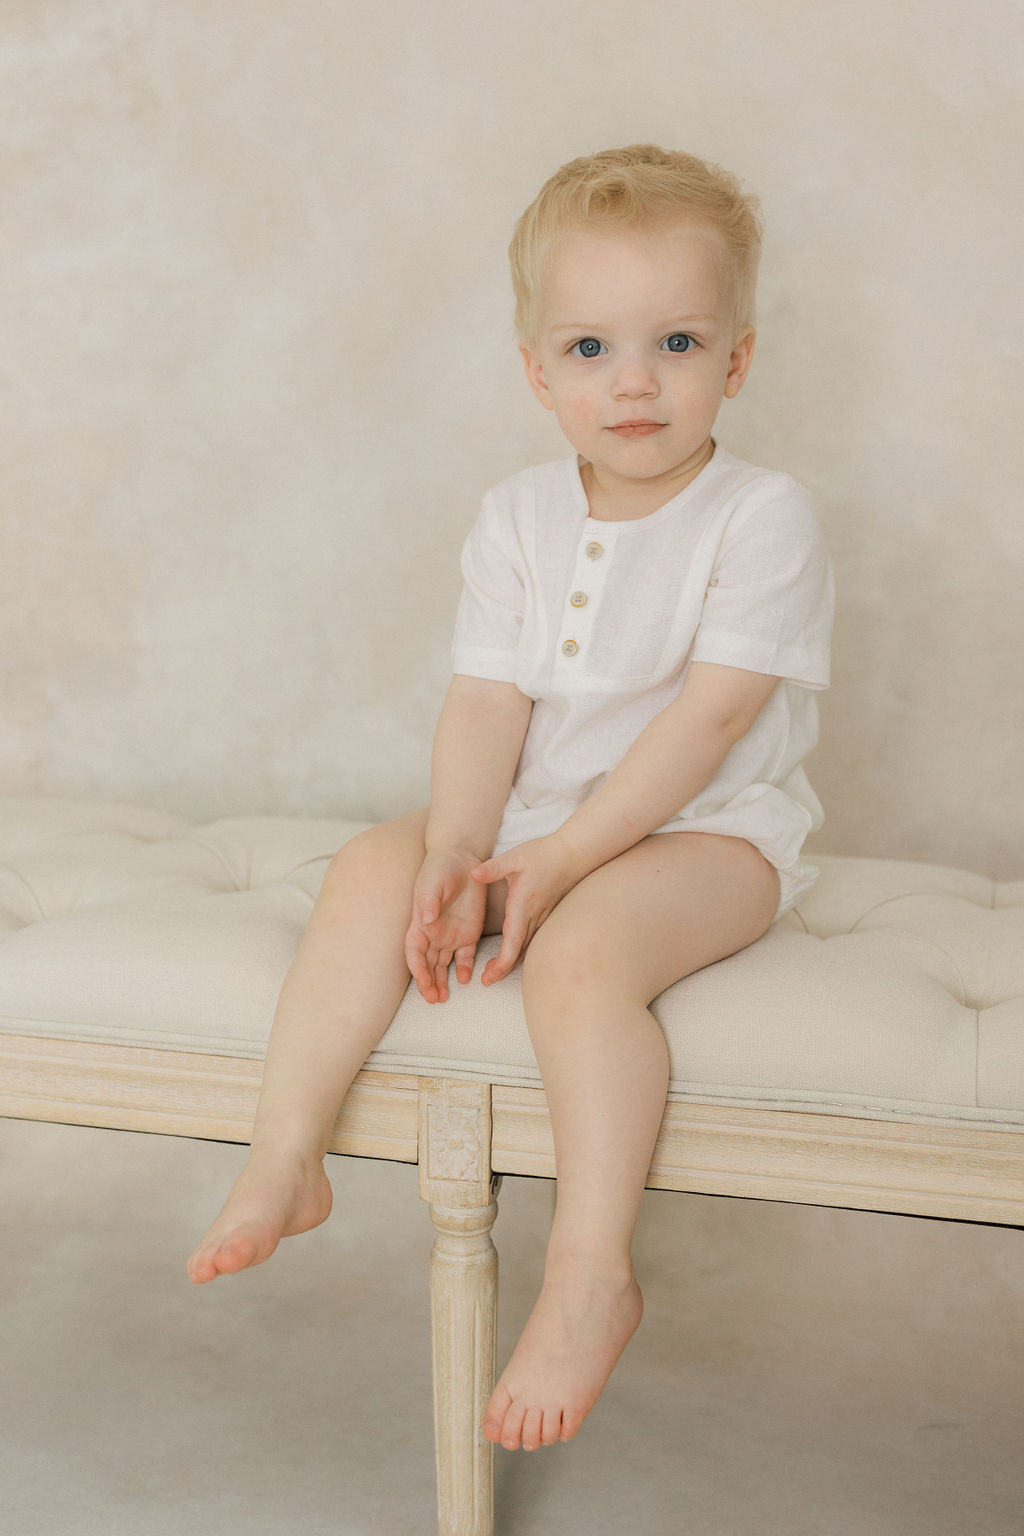 A young toddler boy in a white onesie sits on a bench in a studio thanks to holistic beginnings